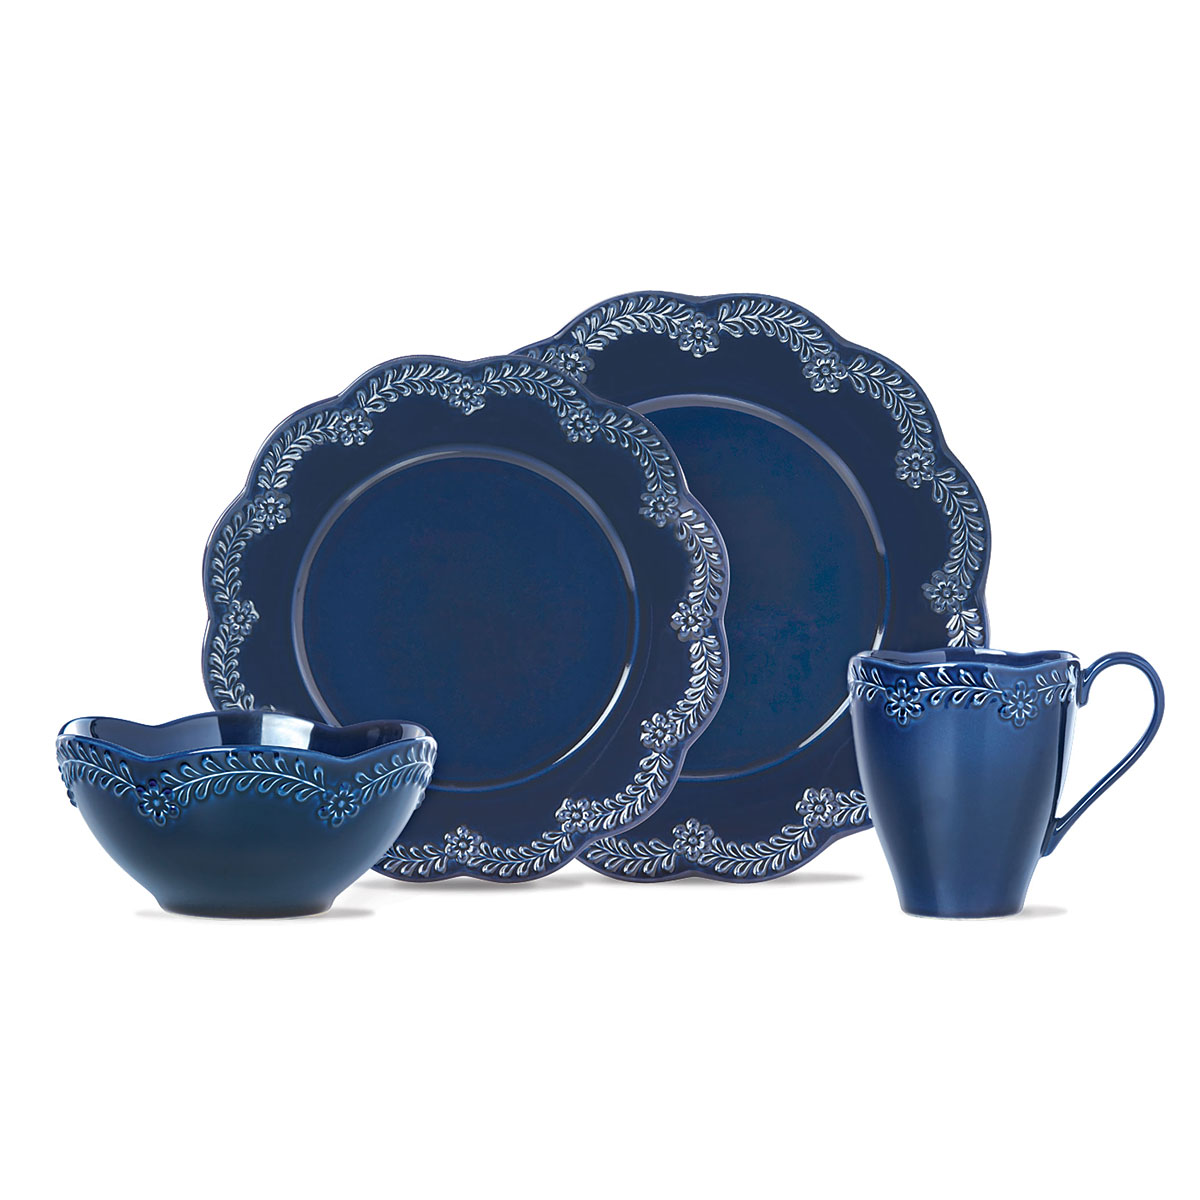 Lenox Chelse Muse China Flared Navy 4 Piece Place Setting